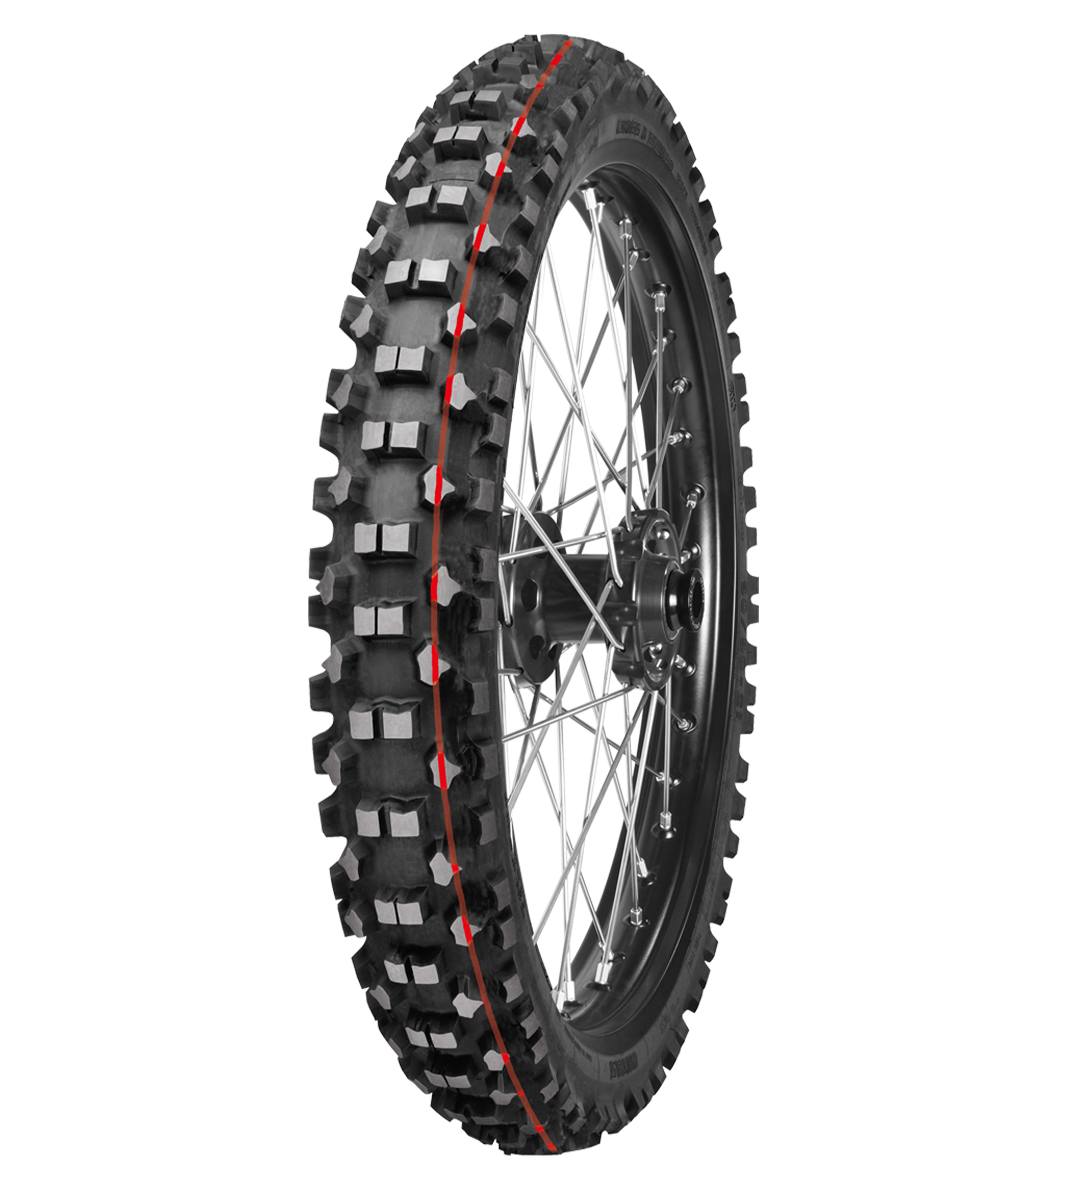 Mitas C-21 STONE KING 90/90-14 Pitcross Off-Road PIT CROSS 46M Red Tube Front Tire, 226071, 90/90-14, C-21 Stone King, Front, Off-Road, Pitcross, Tires - Imported and distributed in North & South America by Lindeco Genuine Powersports - Premier Powersports Equipment and Accessories for Motorcycle Enthusiasts, Professional Riders and Dealers.